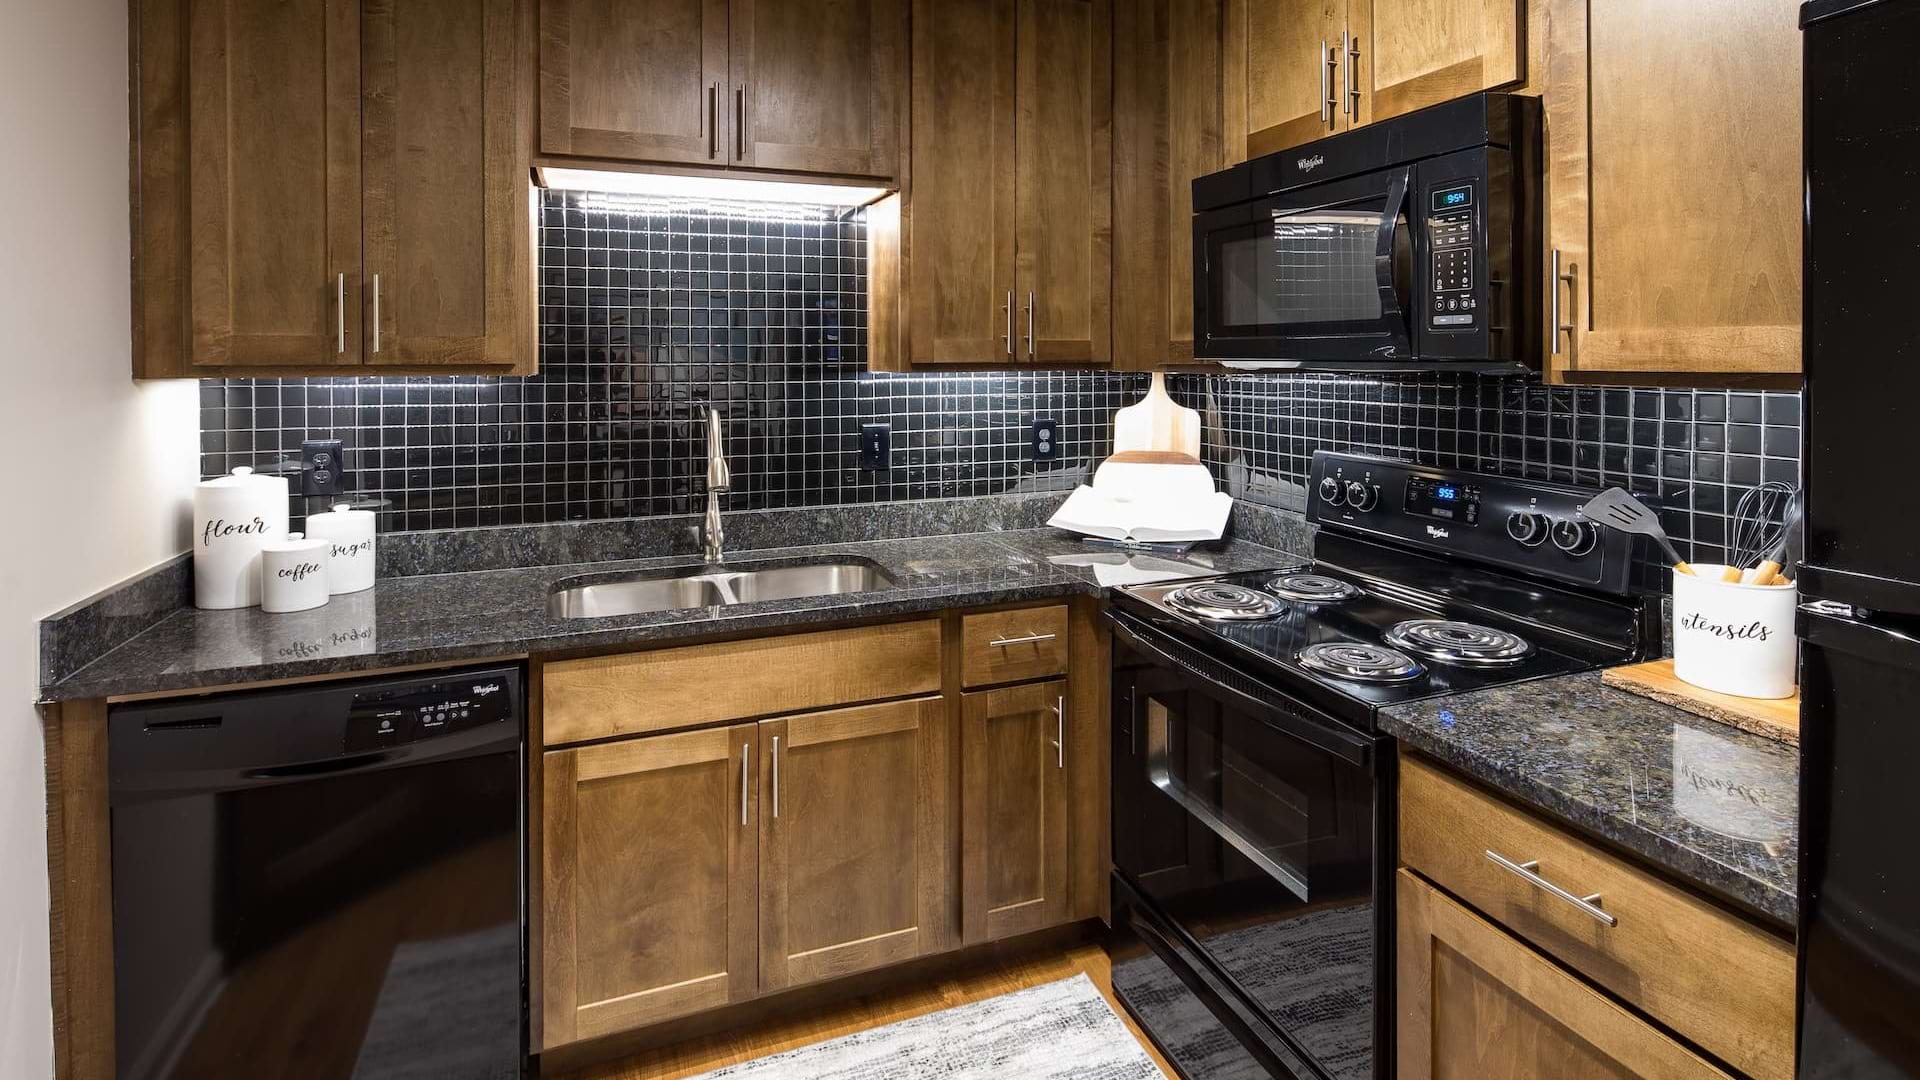 Luxury Kitchen with Sleek Granite Countertops at Our Apartments Near Emory